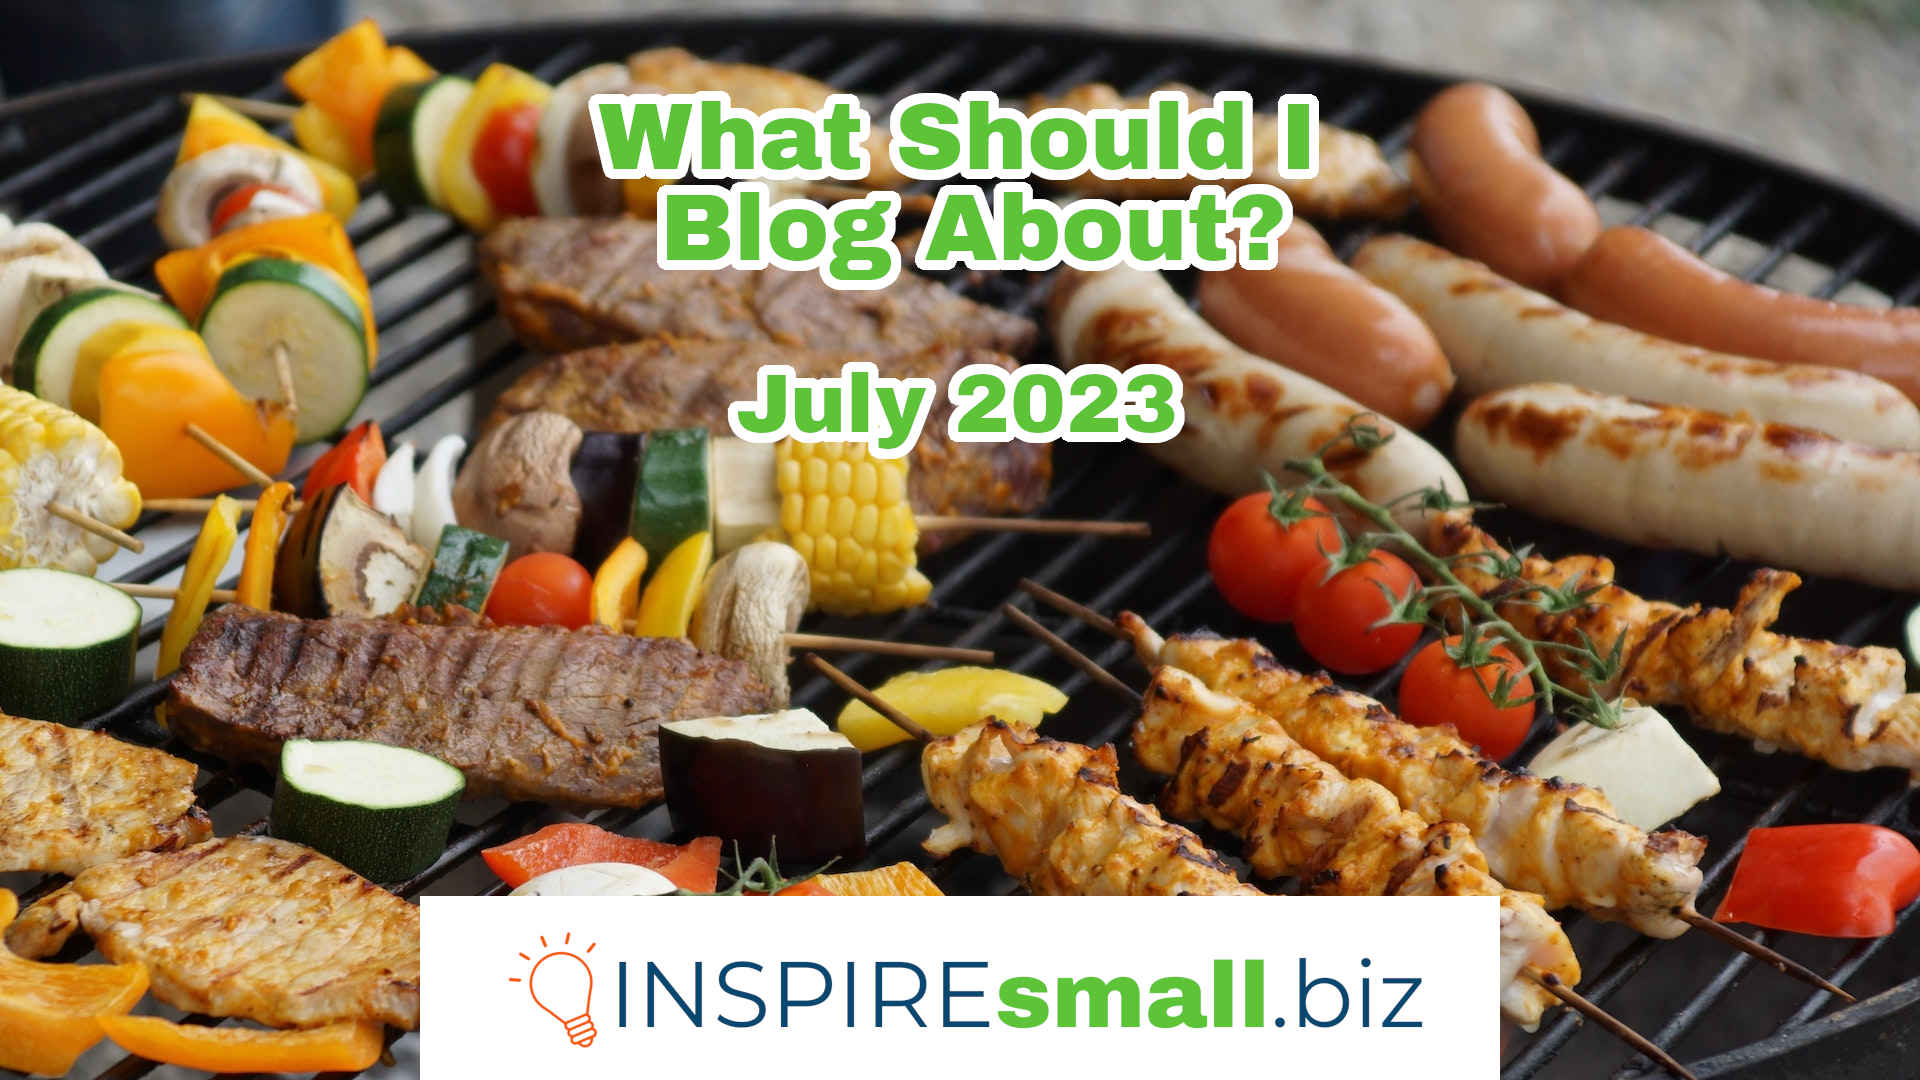 What Should I Blog About? July 2023